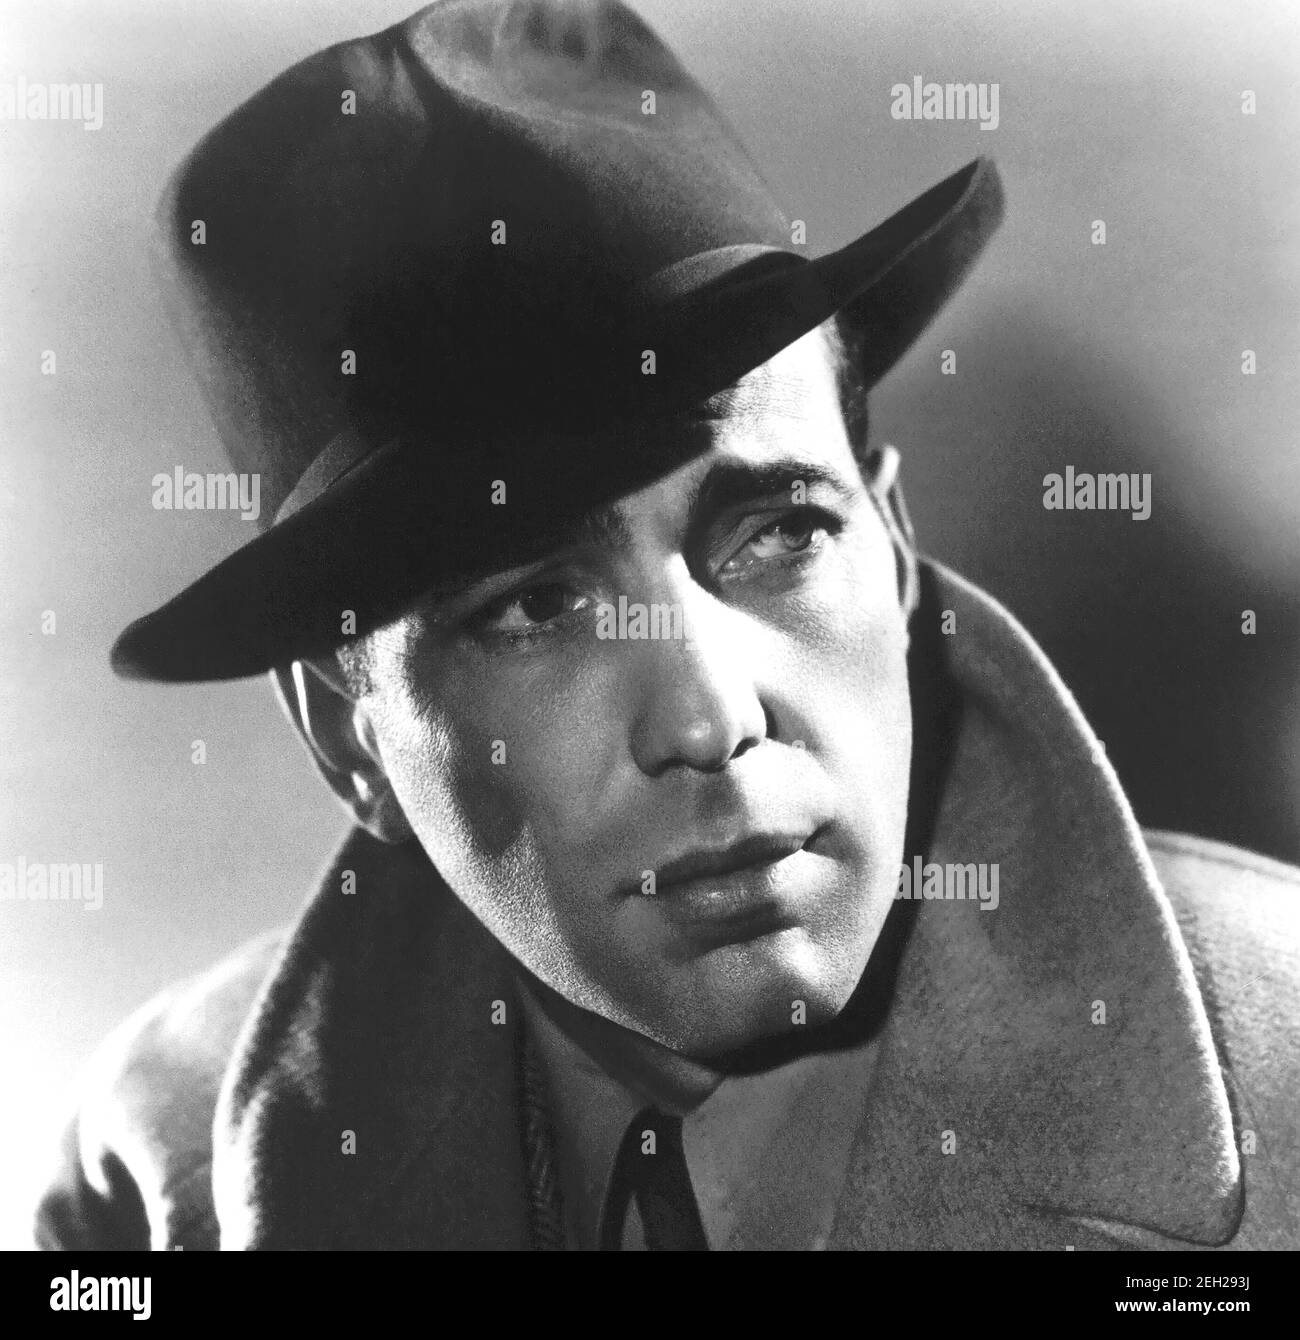 Humphrey Bogart, 1940, b/w portrait, publicity photo. The release at back says this was a new photo of him from the upcoming film Brother Orchid. Stock Photo